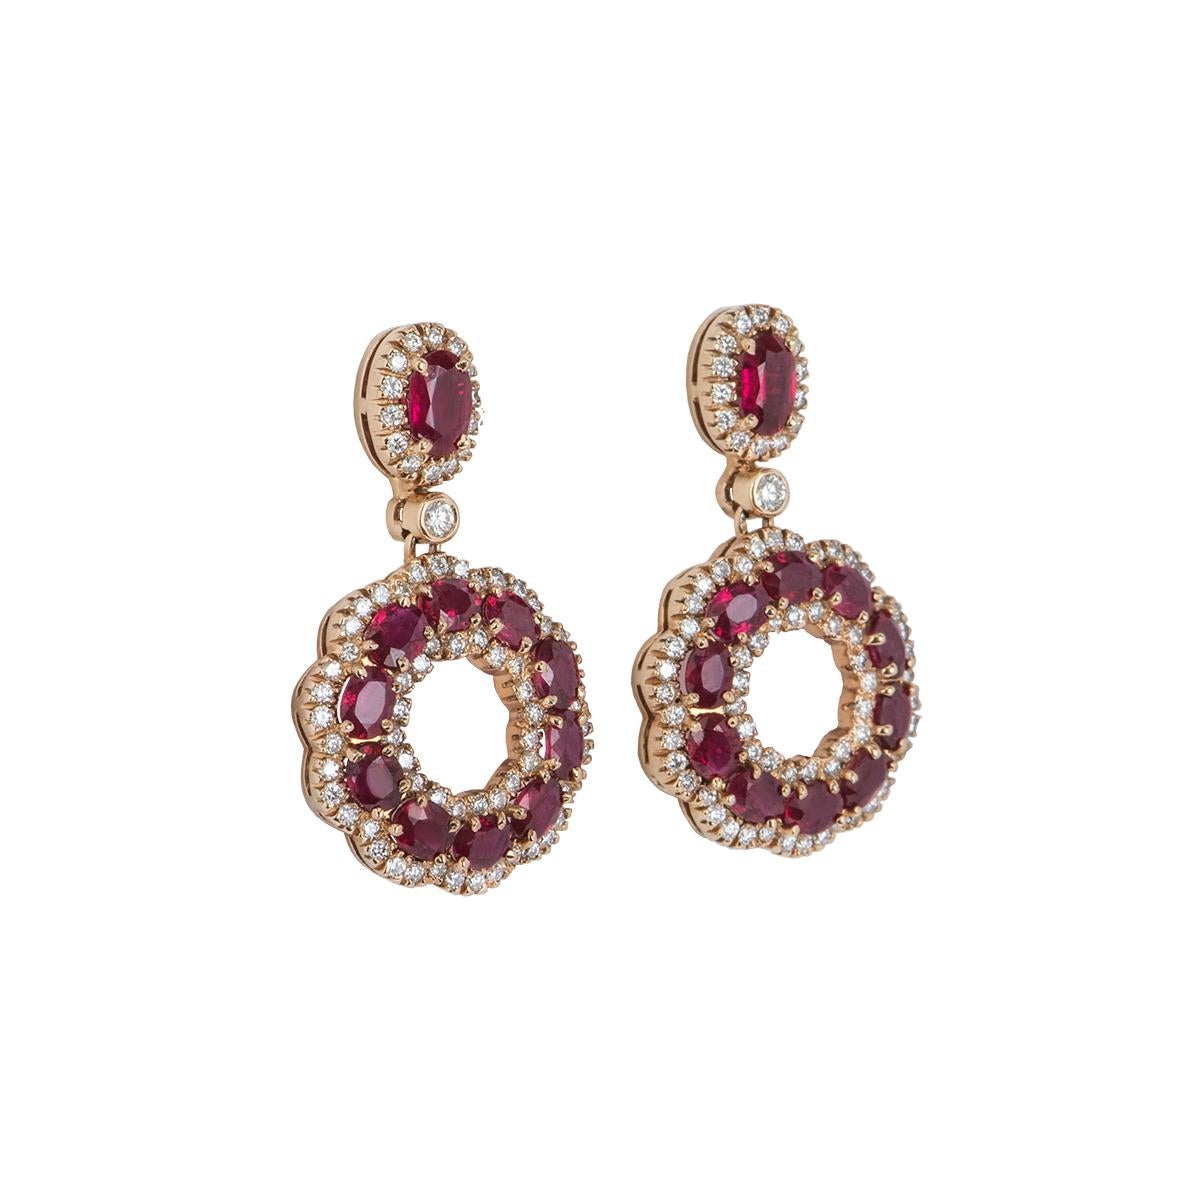 A stunning pair of 18k rose gold ruby and diamond earrings. The earrings feature a single ruby with pave set round brilliant cut diamonds around it followed by a single diamond, suspended from it is an open work circular motif set with oval shaped